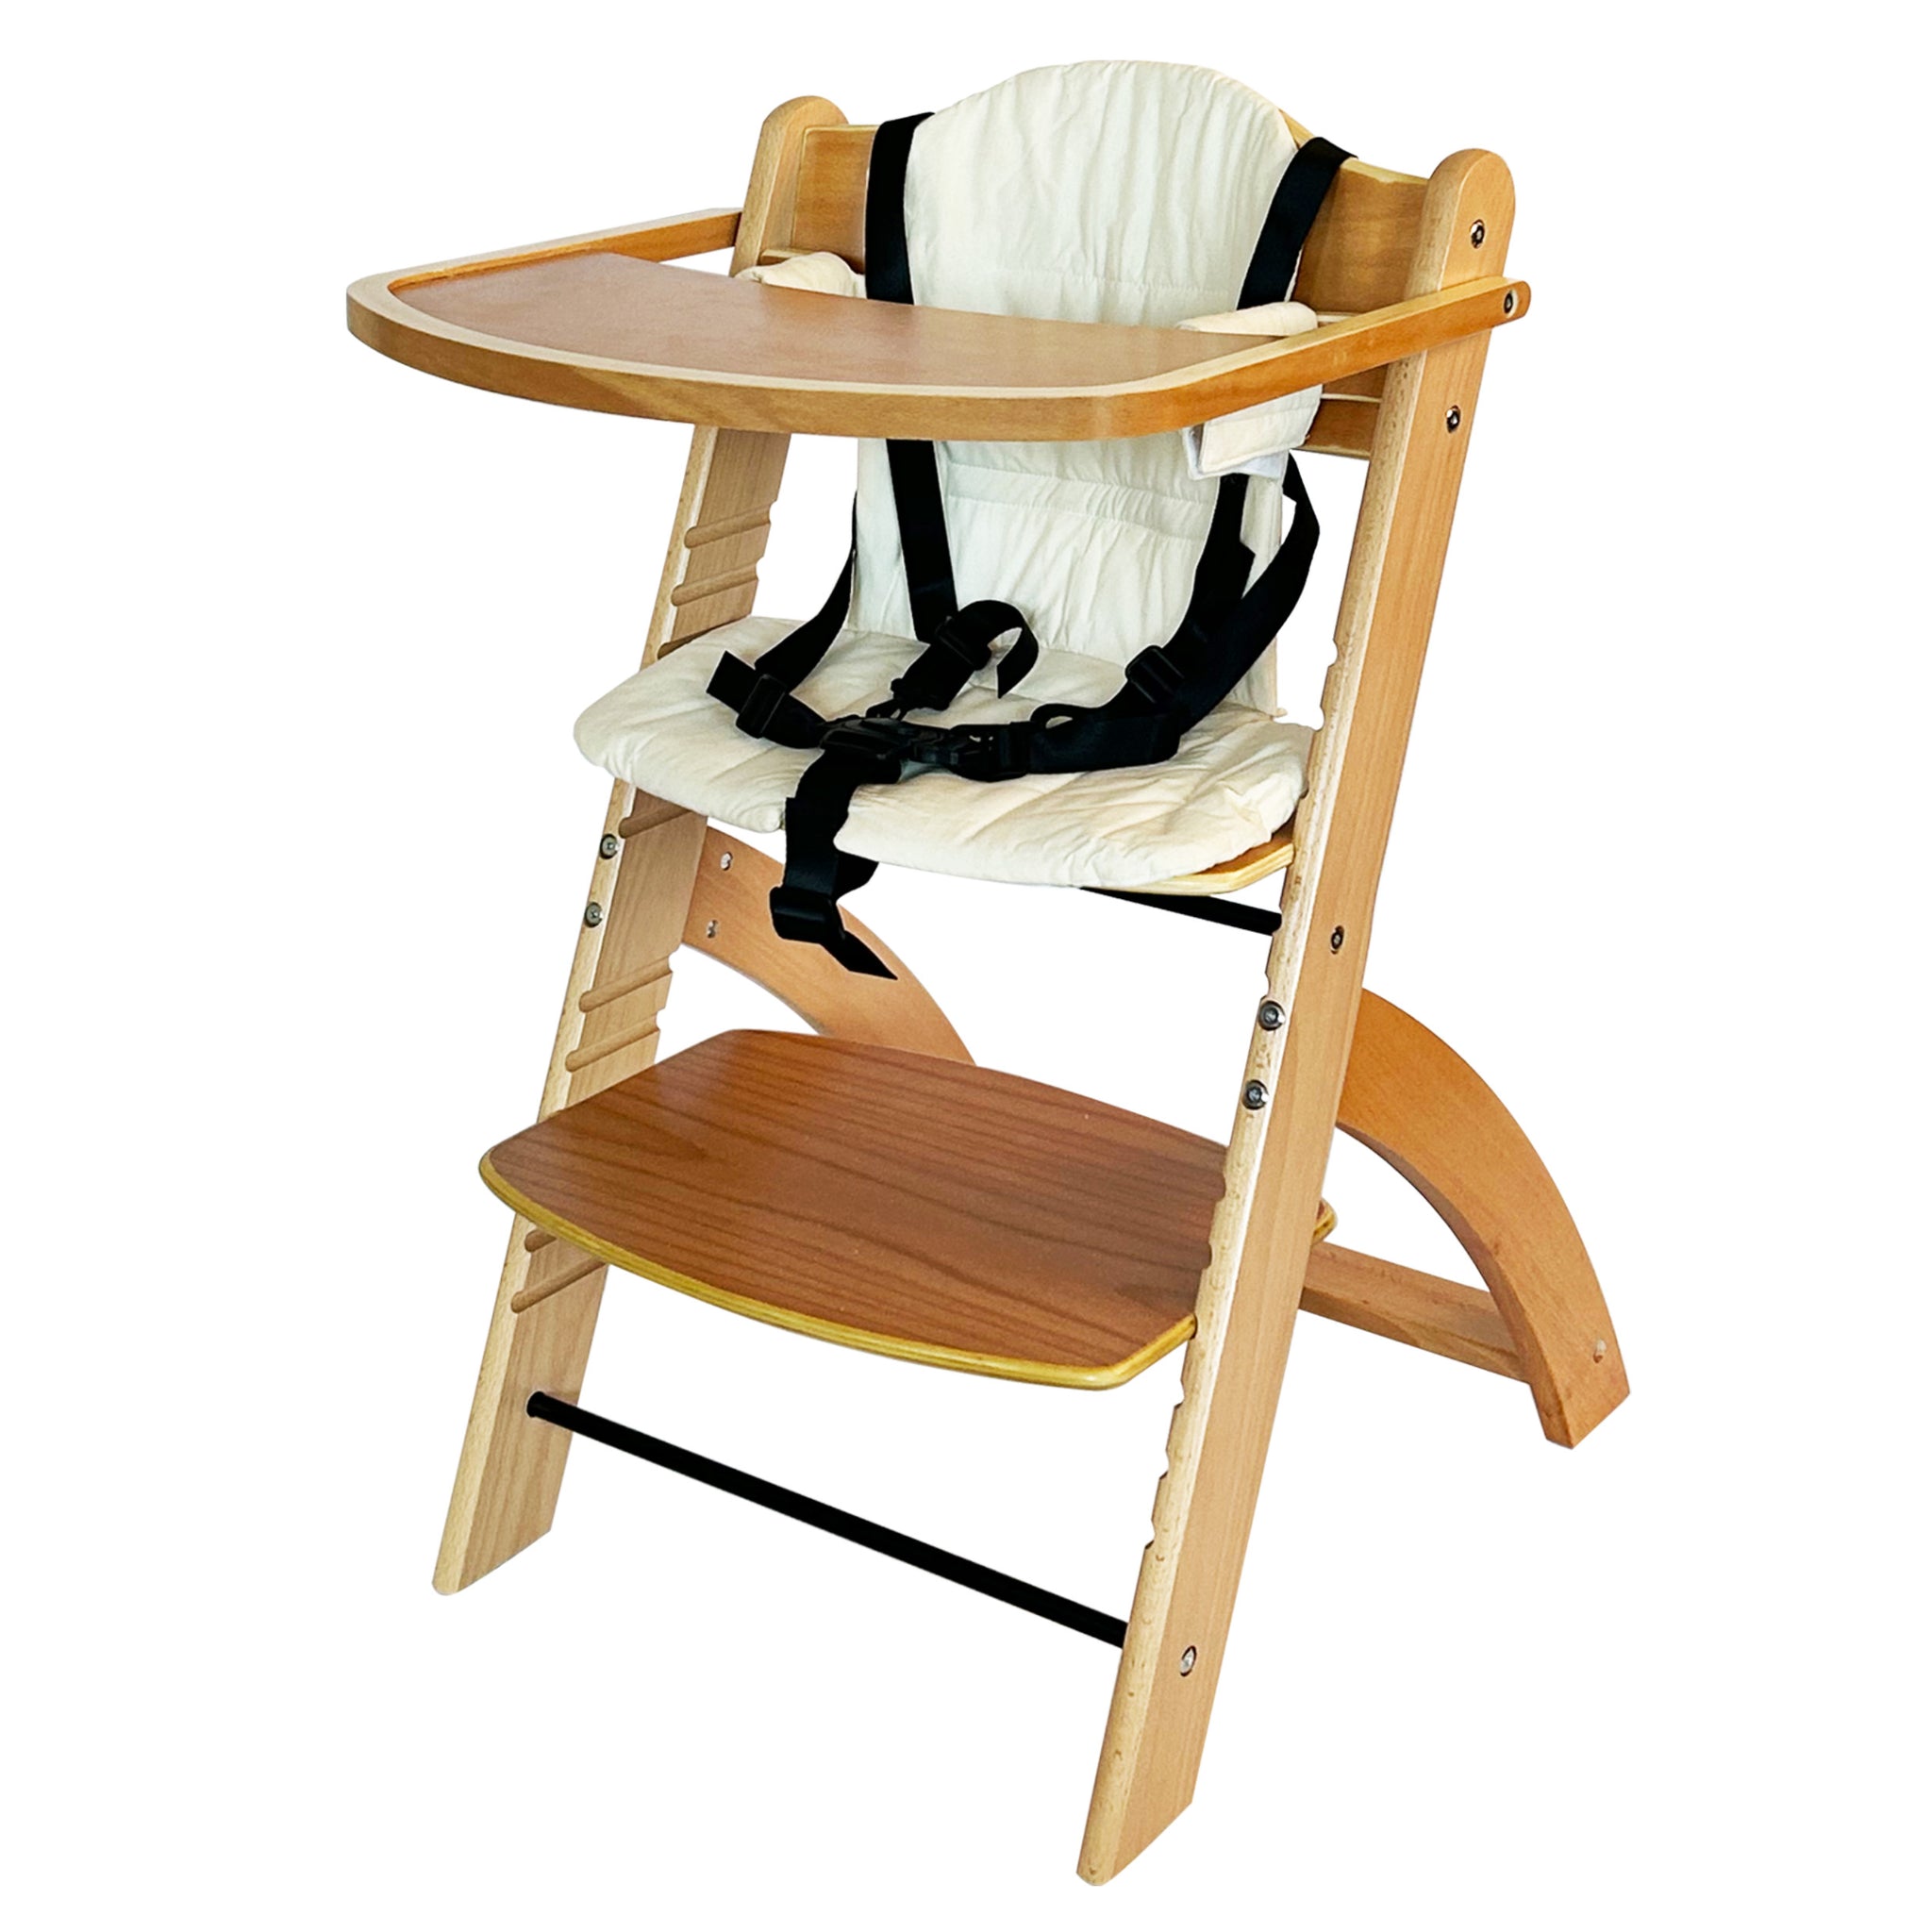 Foldable High Chair for Toddler Baby –